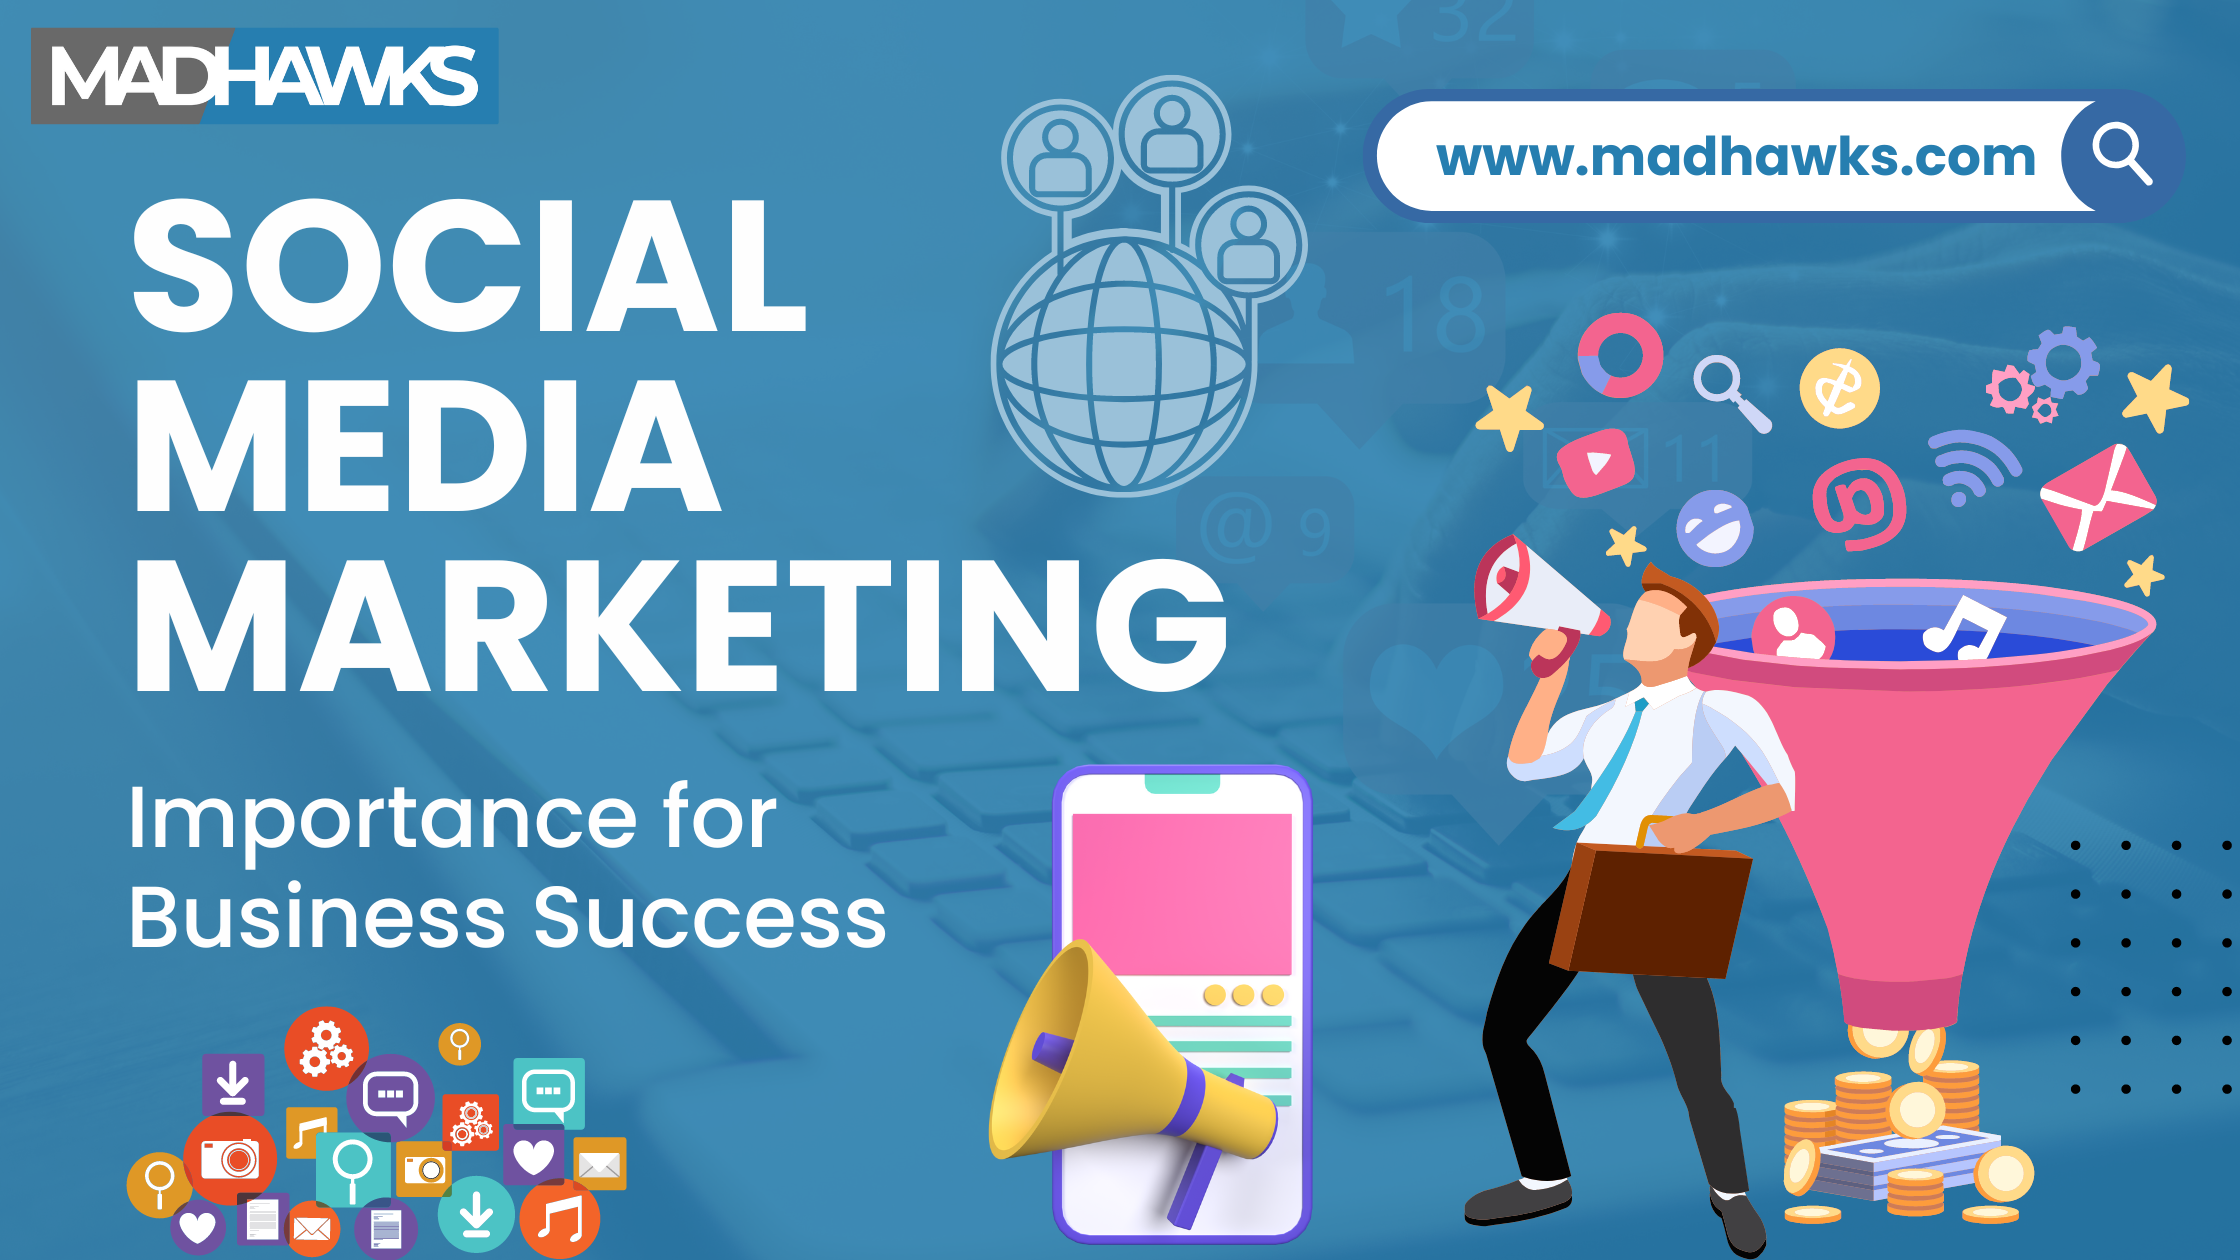 The Importance of Social Media Marketing for Business Success